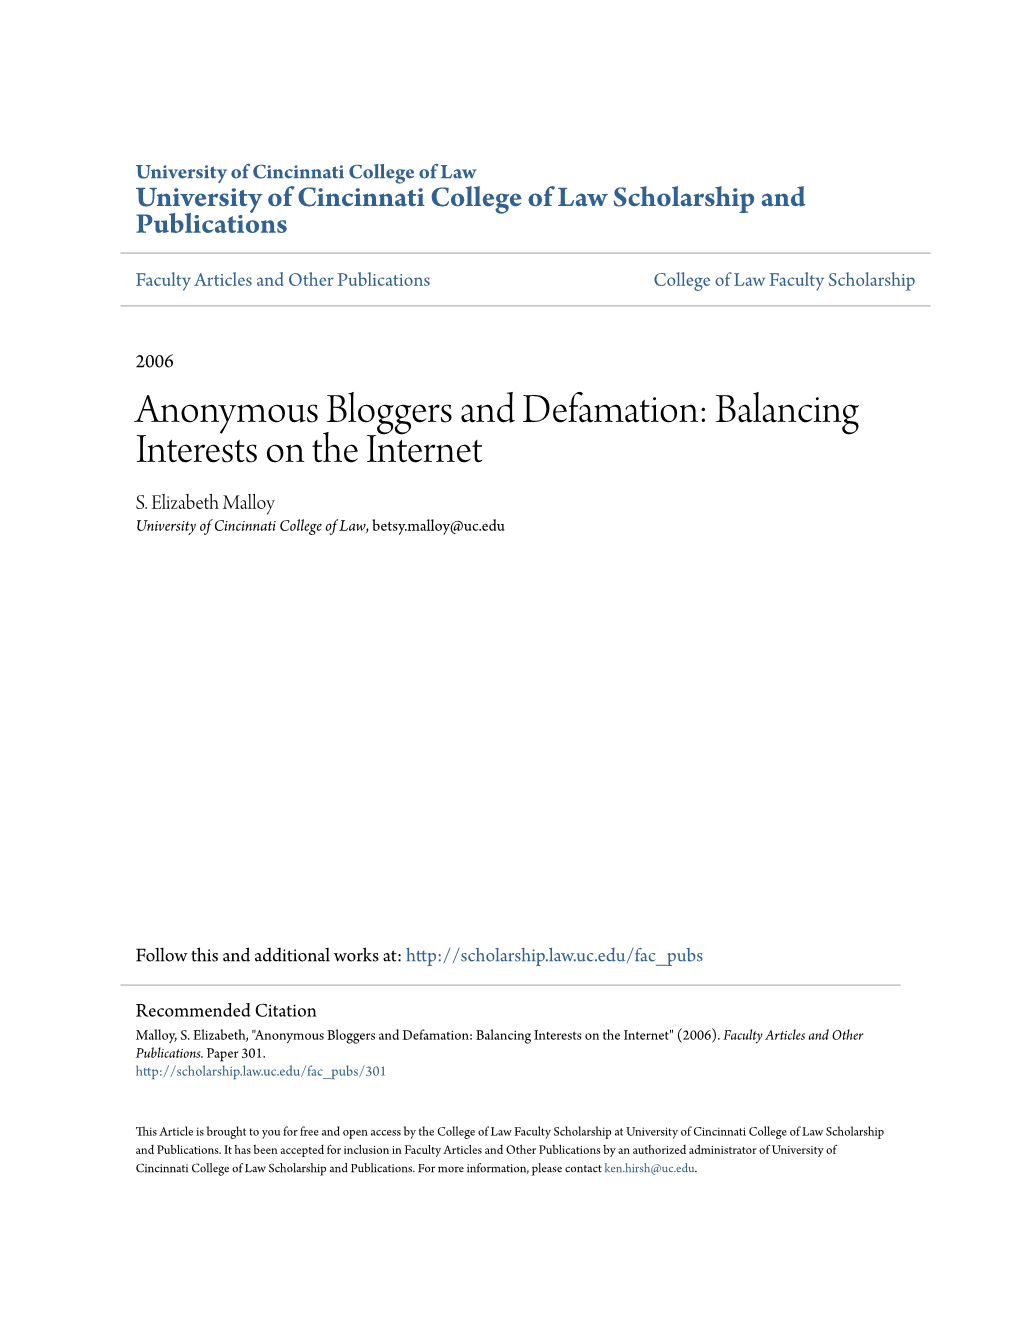 Anonymous Bloggers and Defamation: Balancing Interests on the Internet S